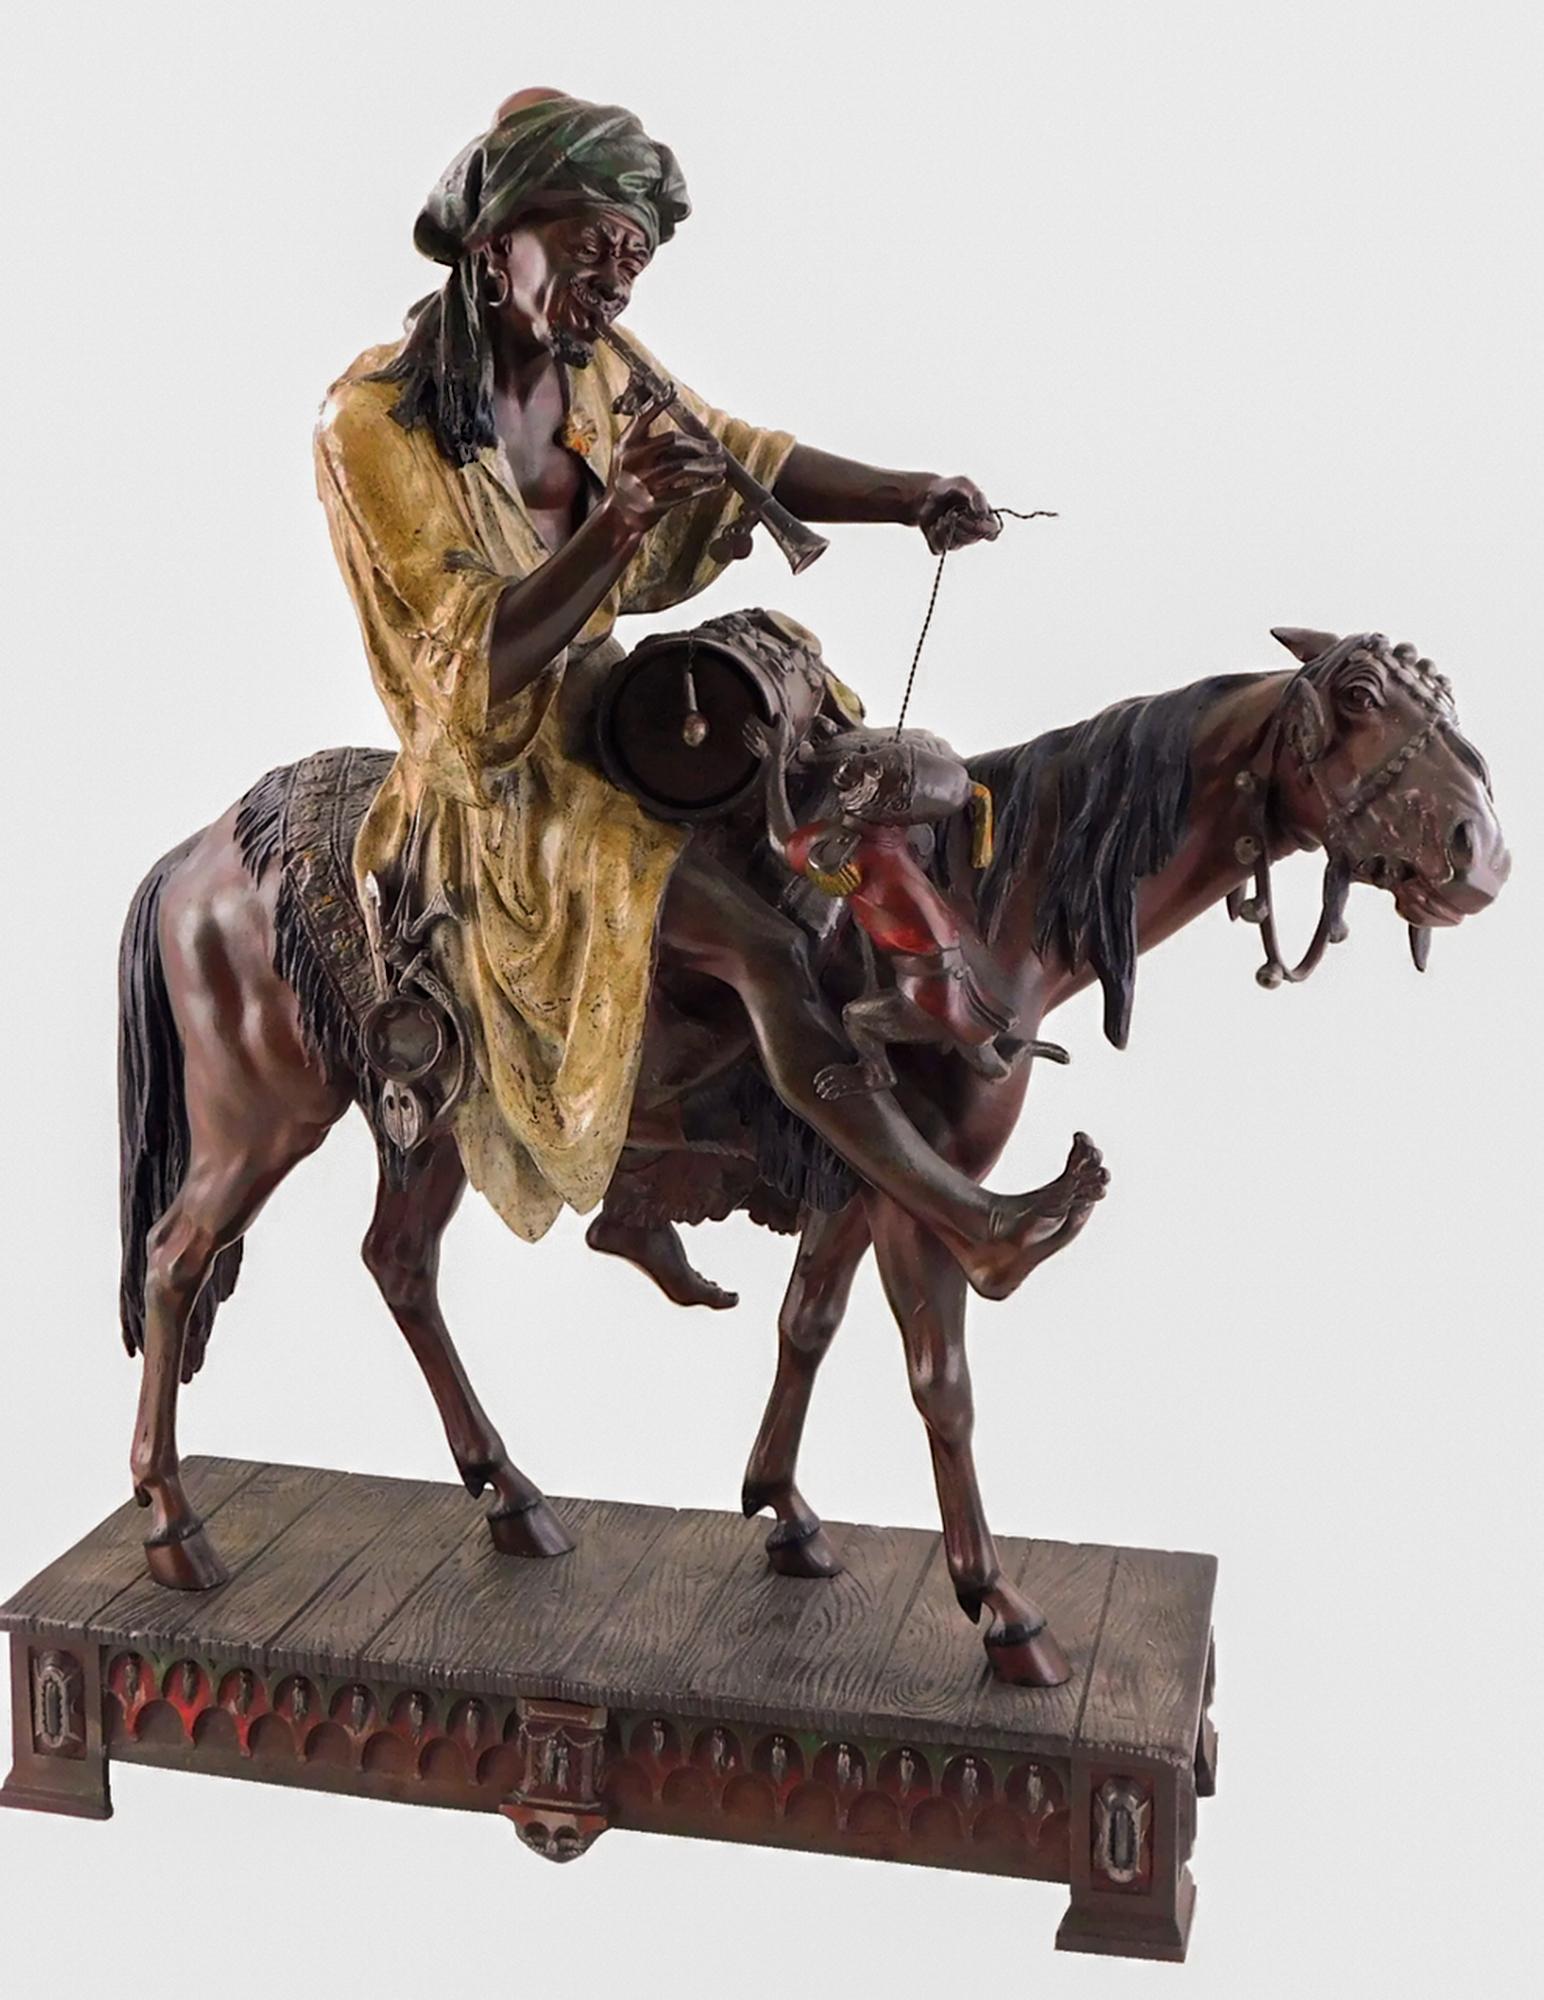 Encounter the resonant blend of motion and music in 'The Nomadic Virtuoso,' a captivating painted metal sculpture by Arthur Waagen. This art piece from the late 19th century depicts a vivid scene of a traveling Arabic musician, masterfully captured